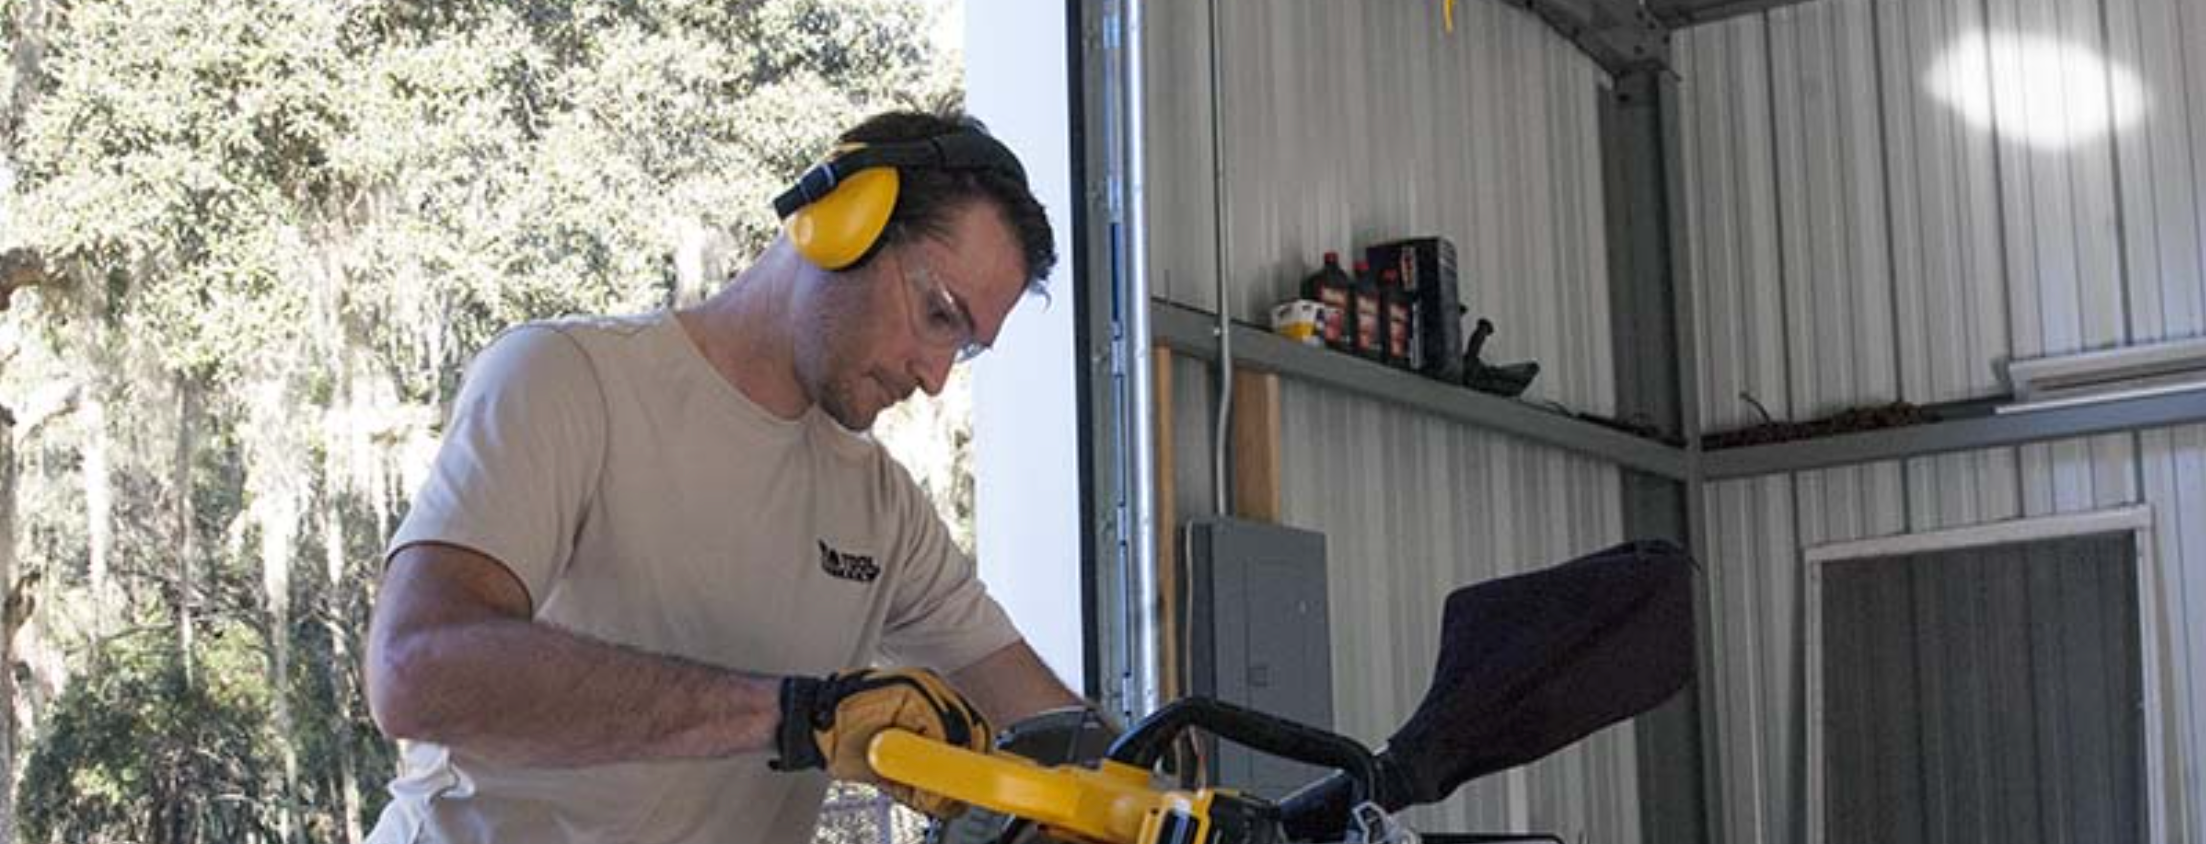 Hearing Protection on a Construction Jobsite | WRYKER Construction Supply